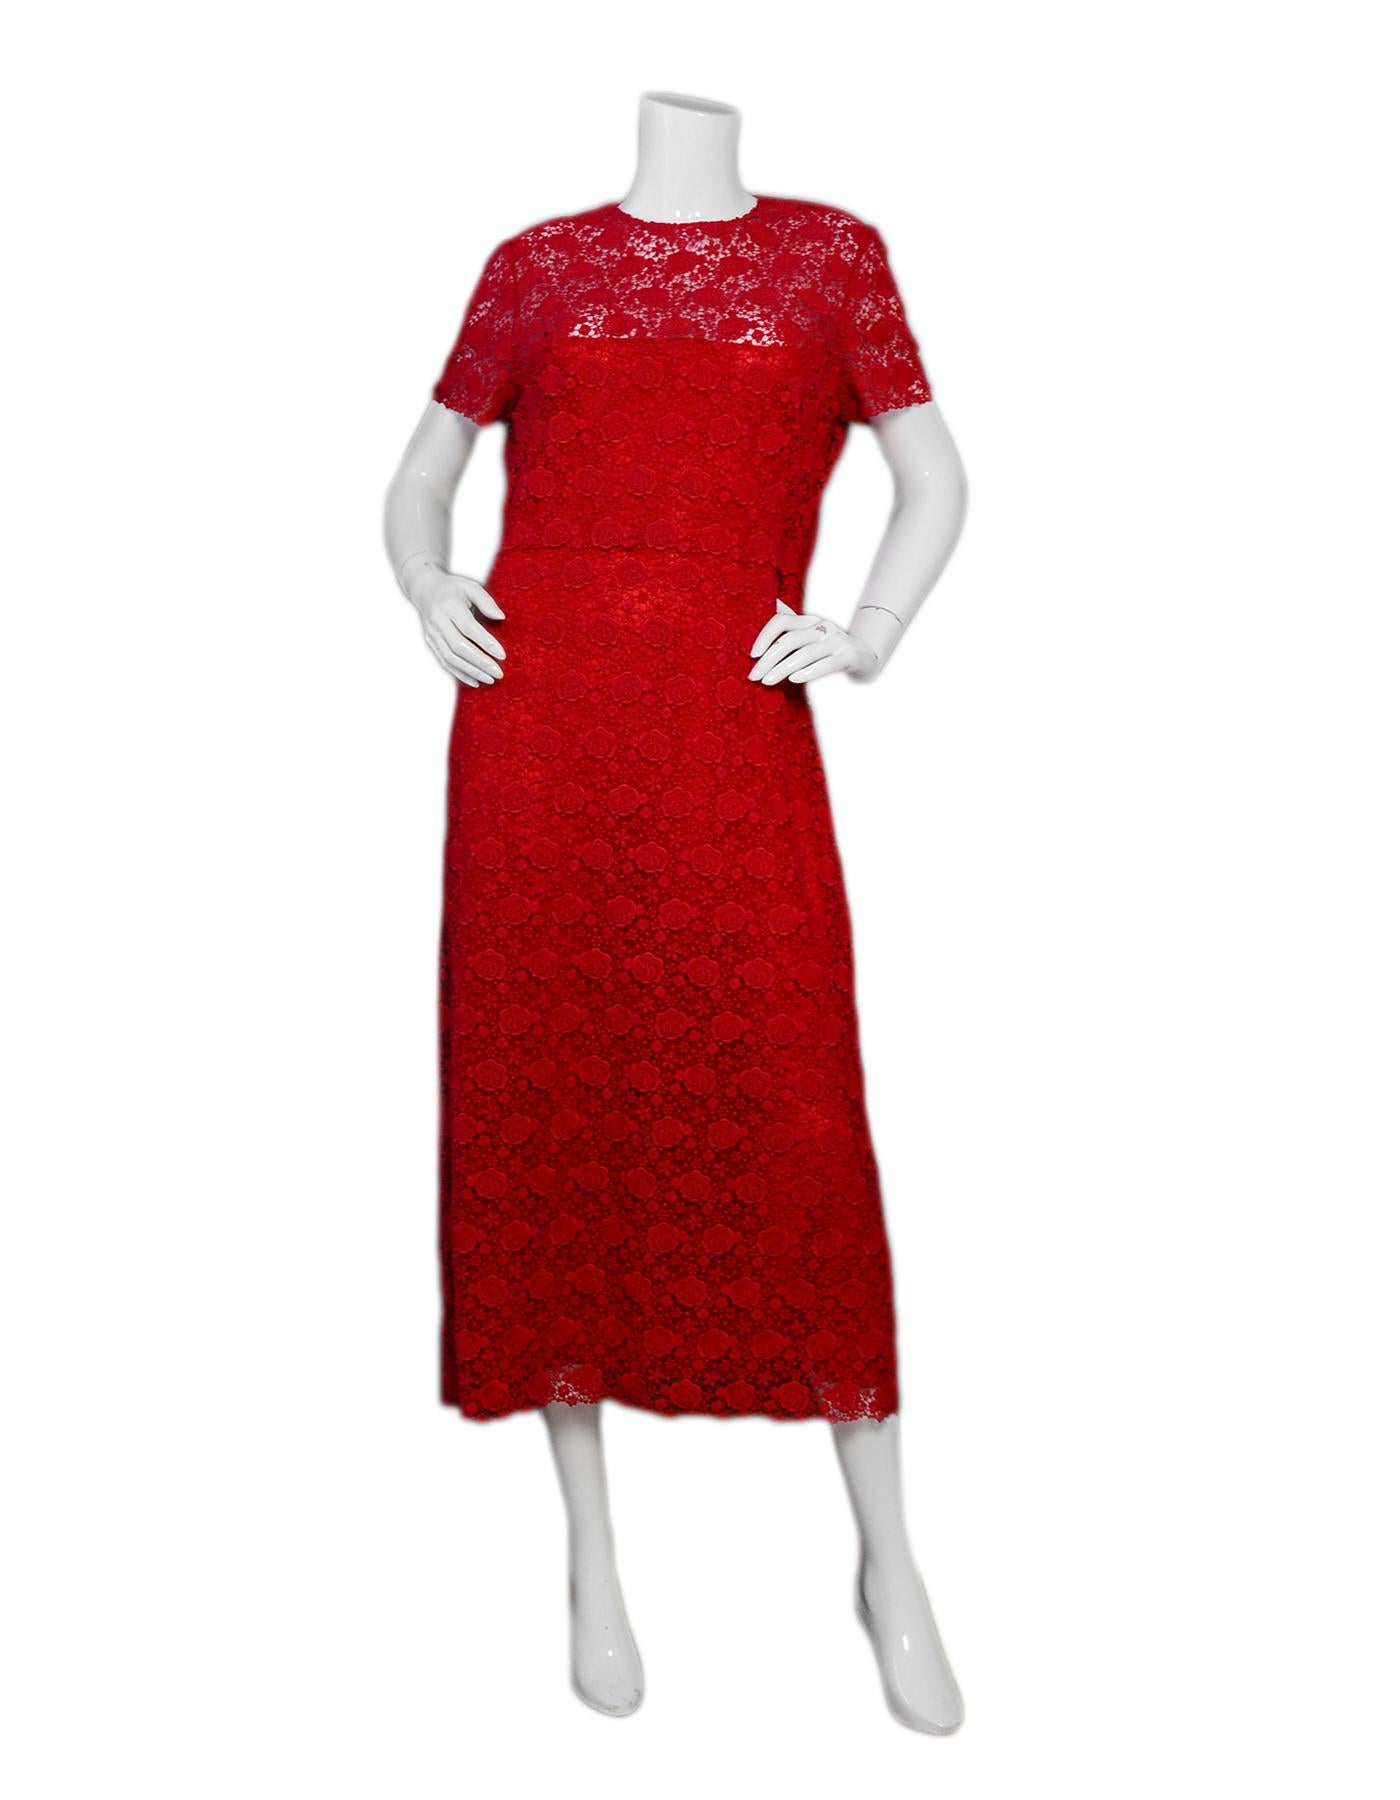 Valentino 2019 Red Floral Lace Midi Dress sz 12

Made In: Italy
Year of Production: 2019
Color: Red
Materials: 89% cotton, 11% polyester. Combo: 100% polyamide
Lining: 91% silk, 9% elastane
Opening/Closure: Back hiden zip
Overall Condition: